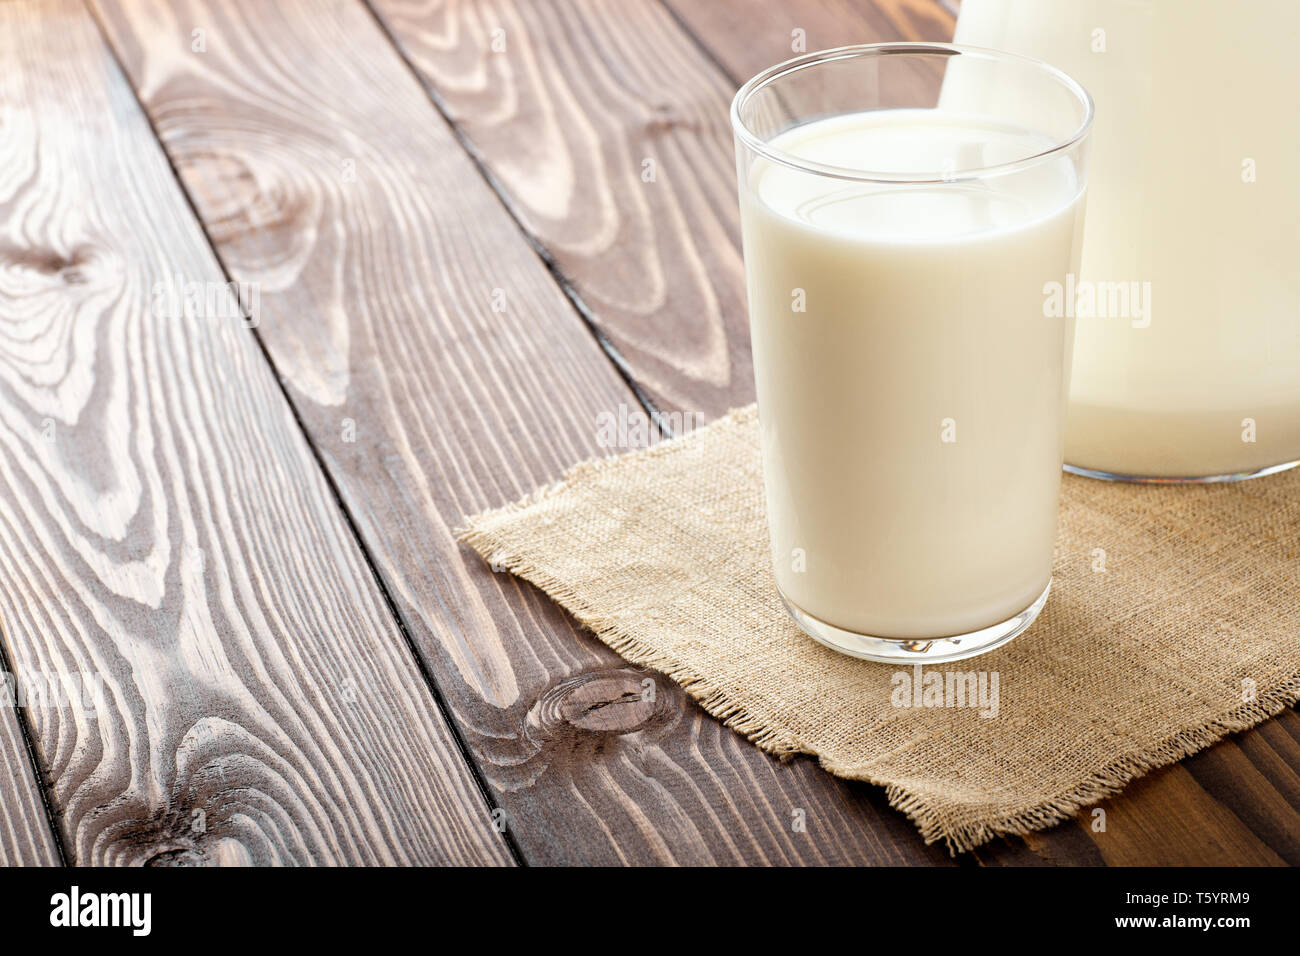 milk in glass on table Stock Photo